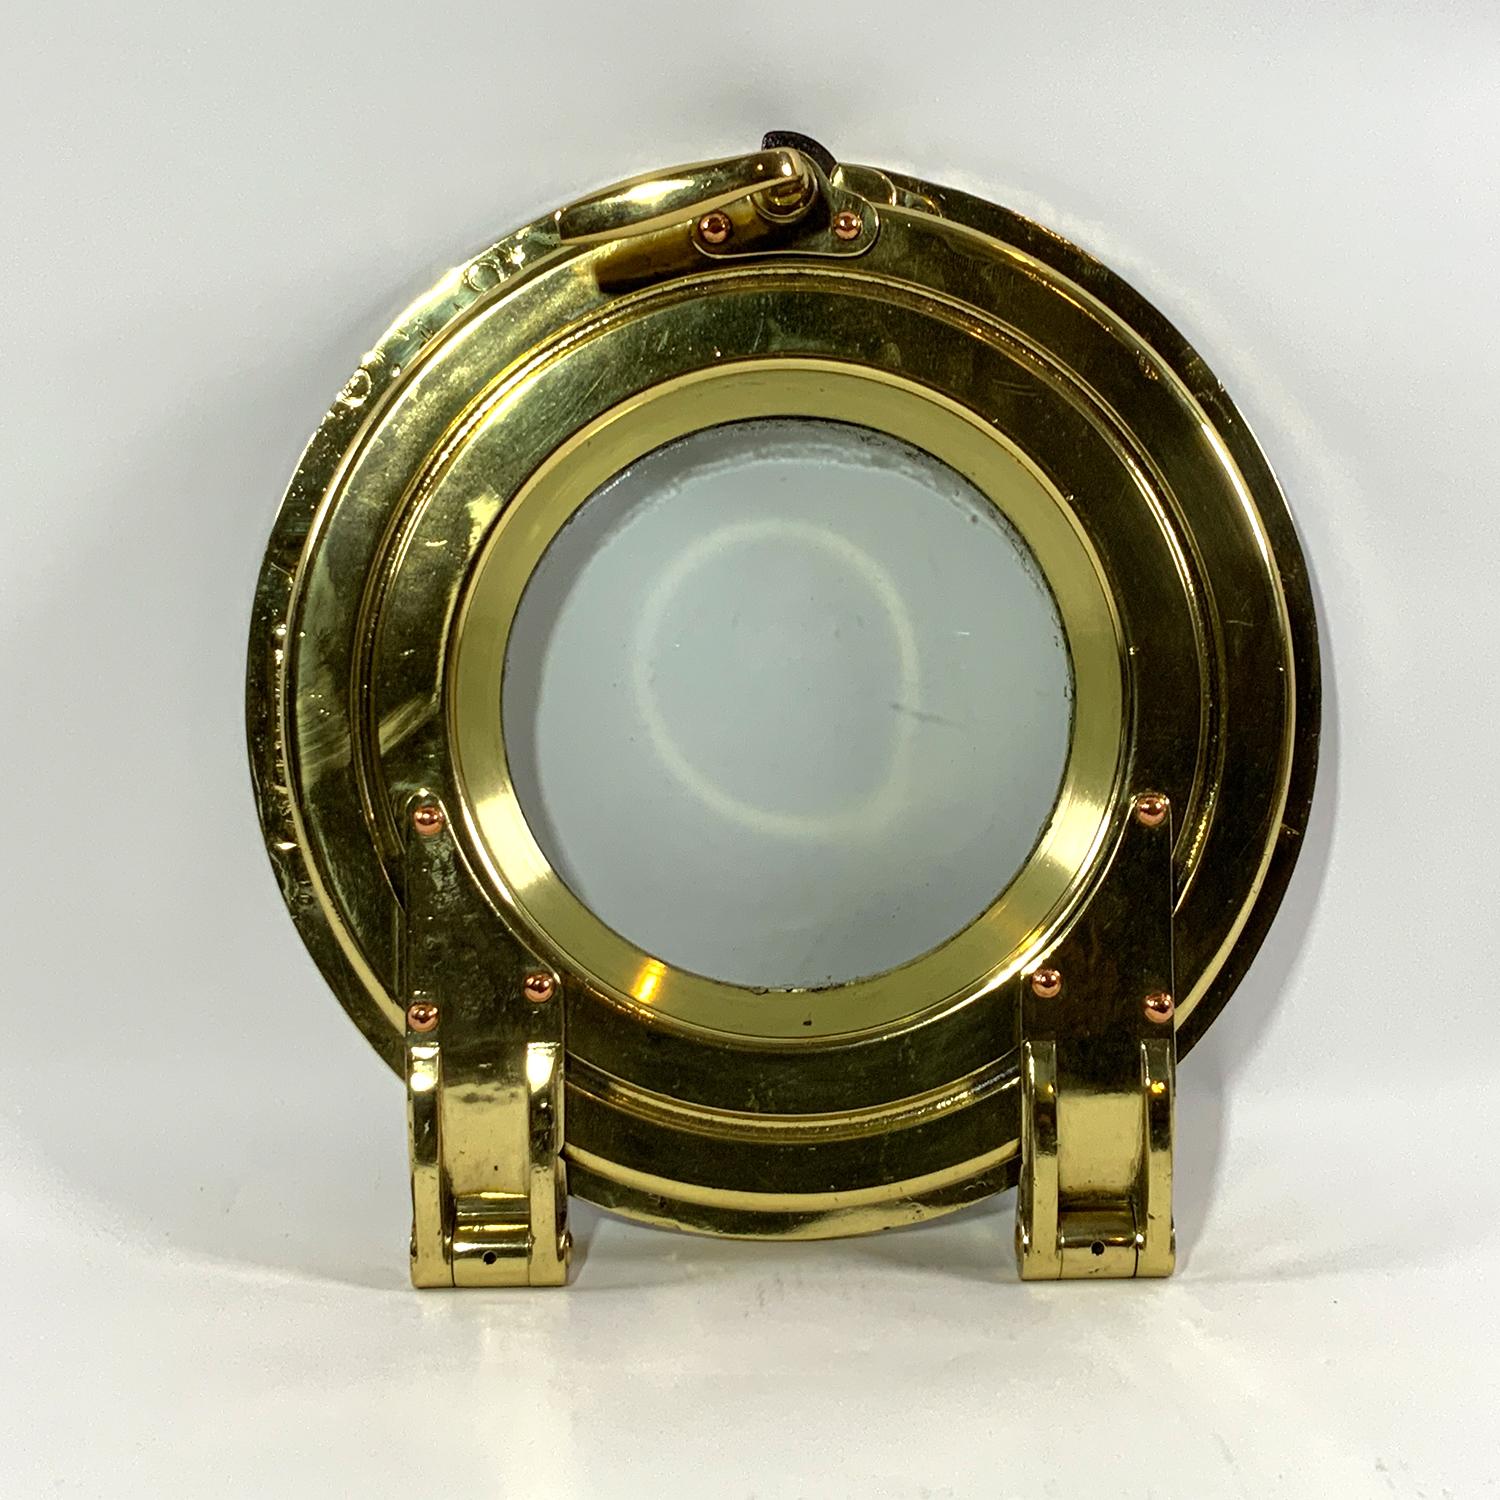 Solid brass hinged door porthole from a very high quality yacht. Superb hinge mechanism. Impossible to reproduce. Circa 1920.